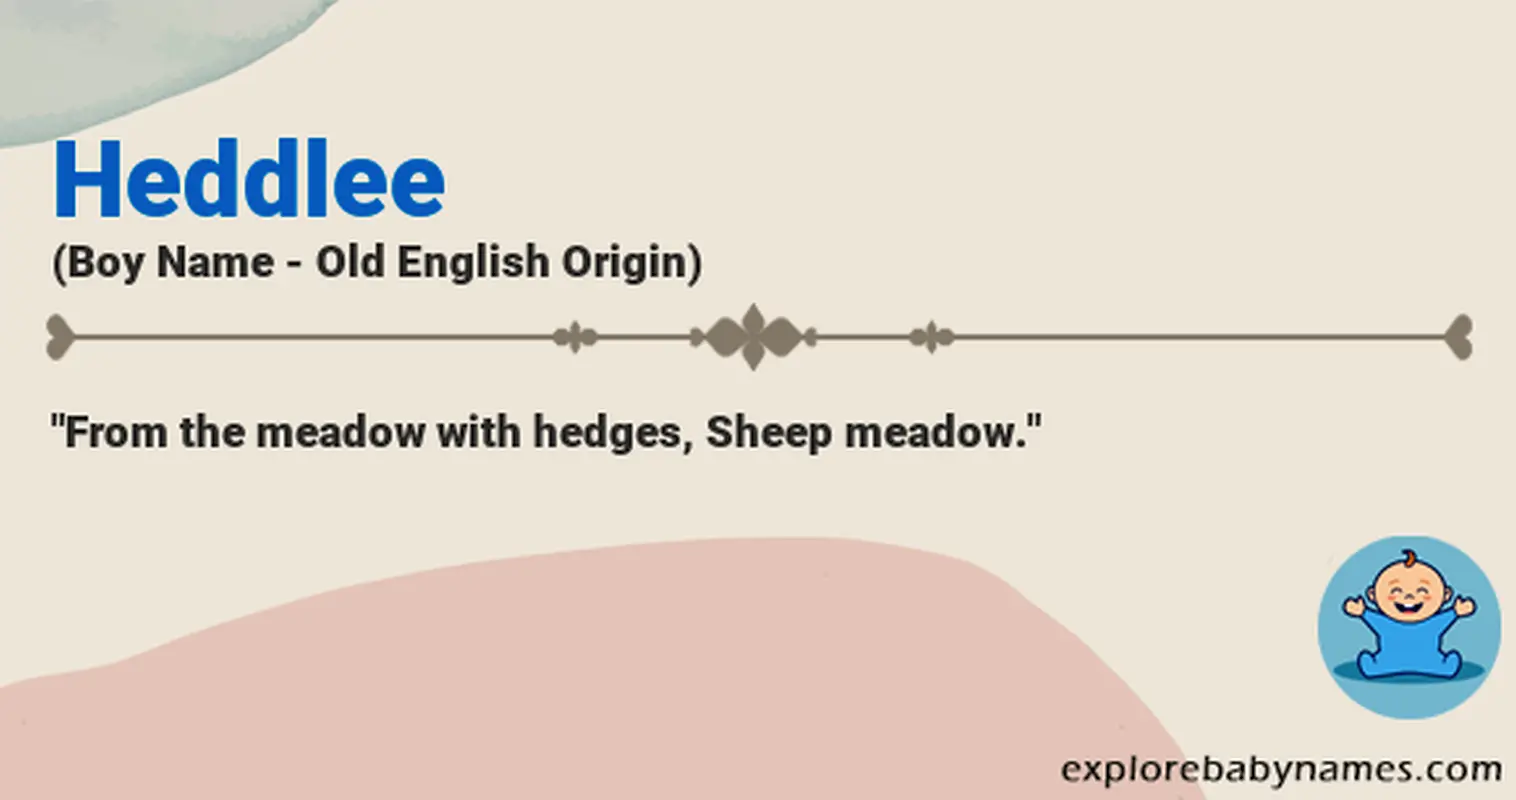 Meaning of Heddlee